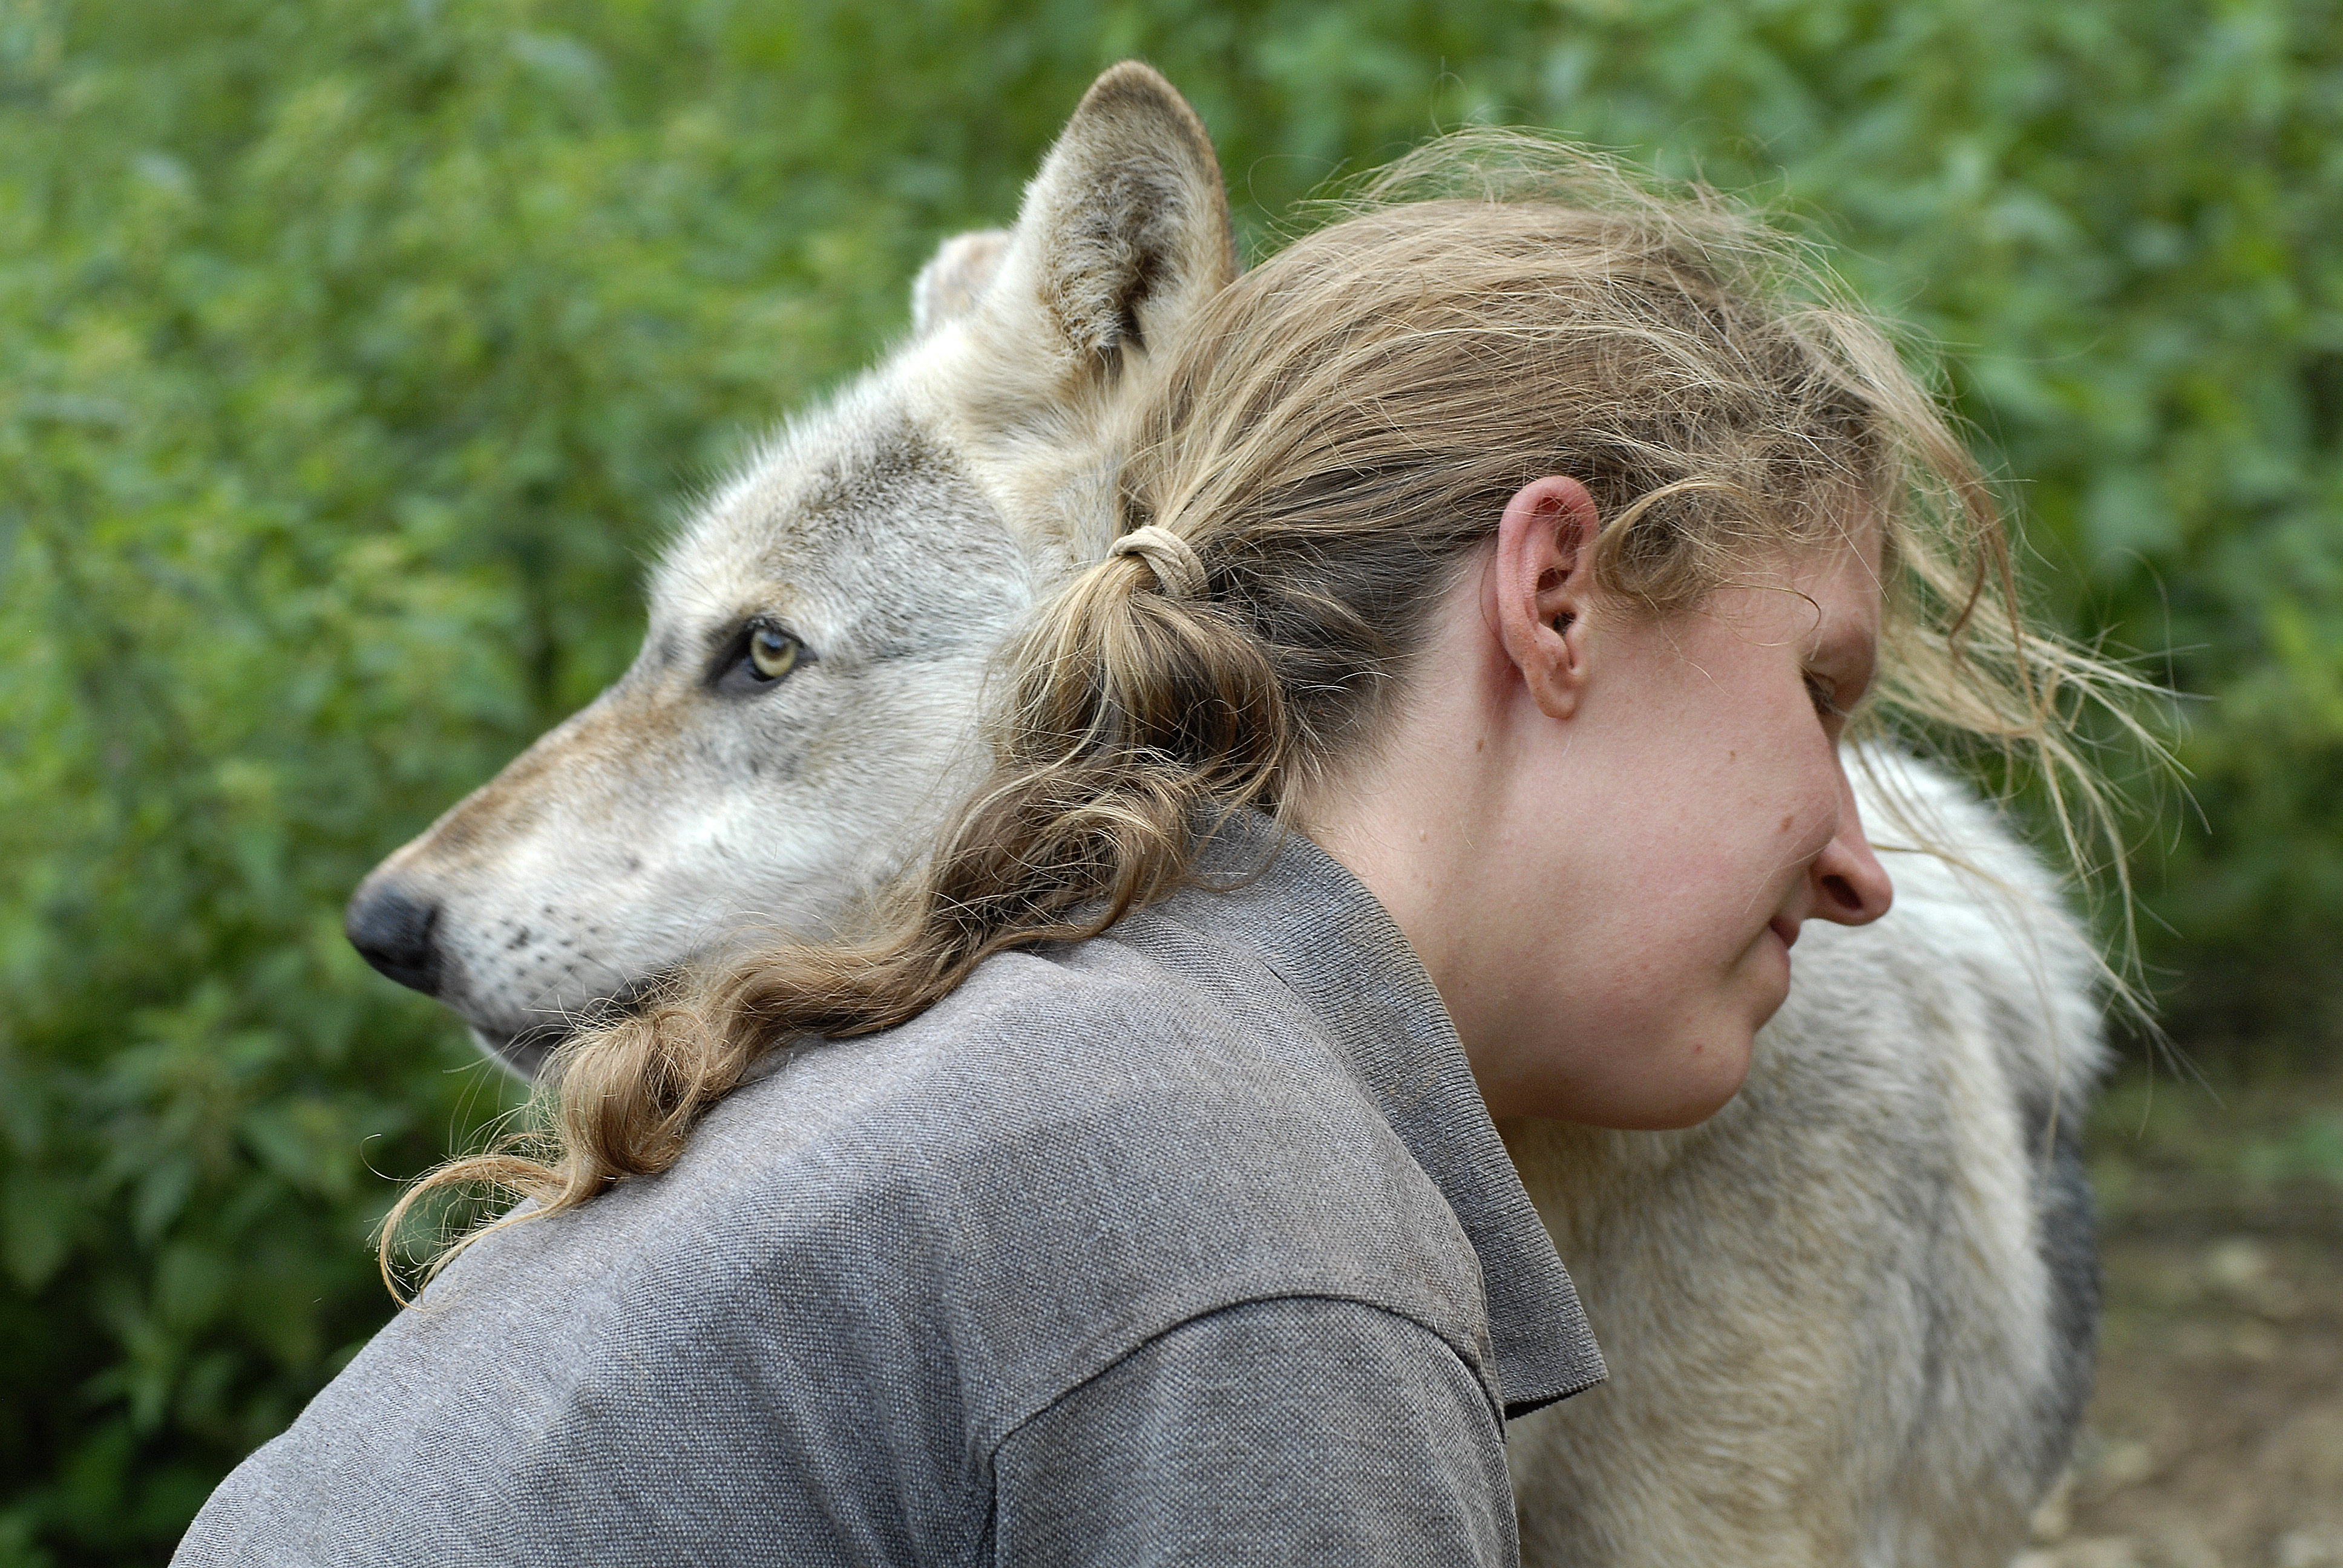 Isla Ellis with a wolf at The Wolf Centre in Combe Martin, Devon, 1st September 2012. Pic by JohnRobertson/BARCROFT MEDIA.